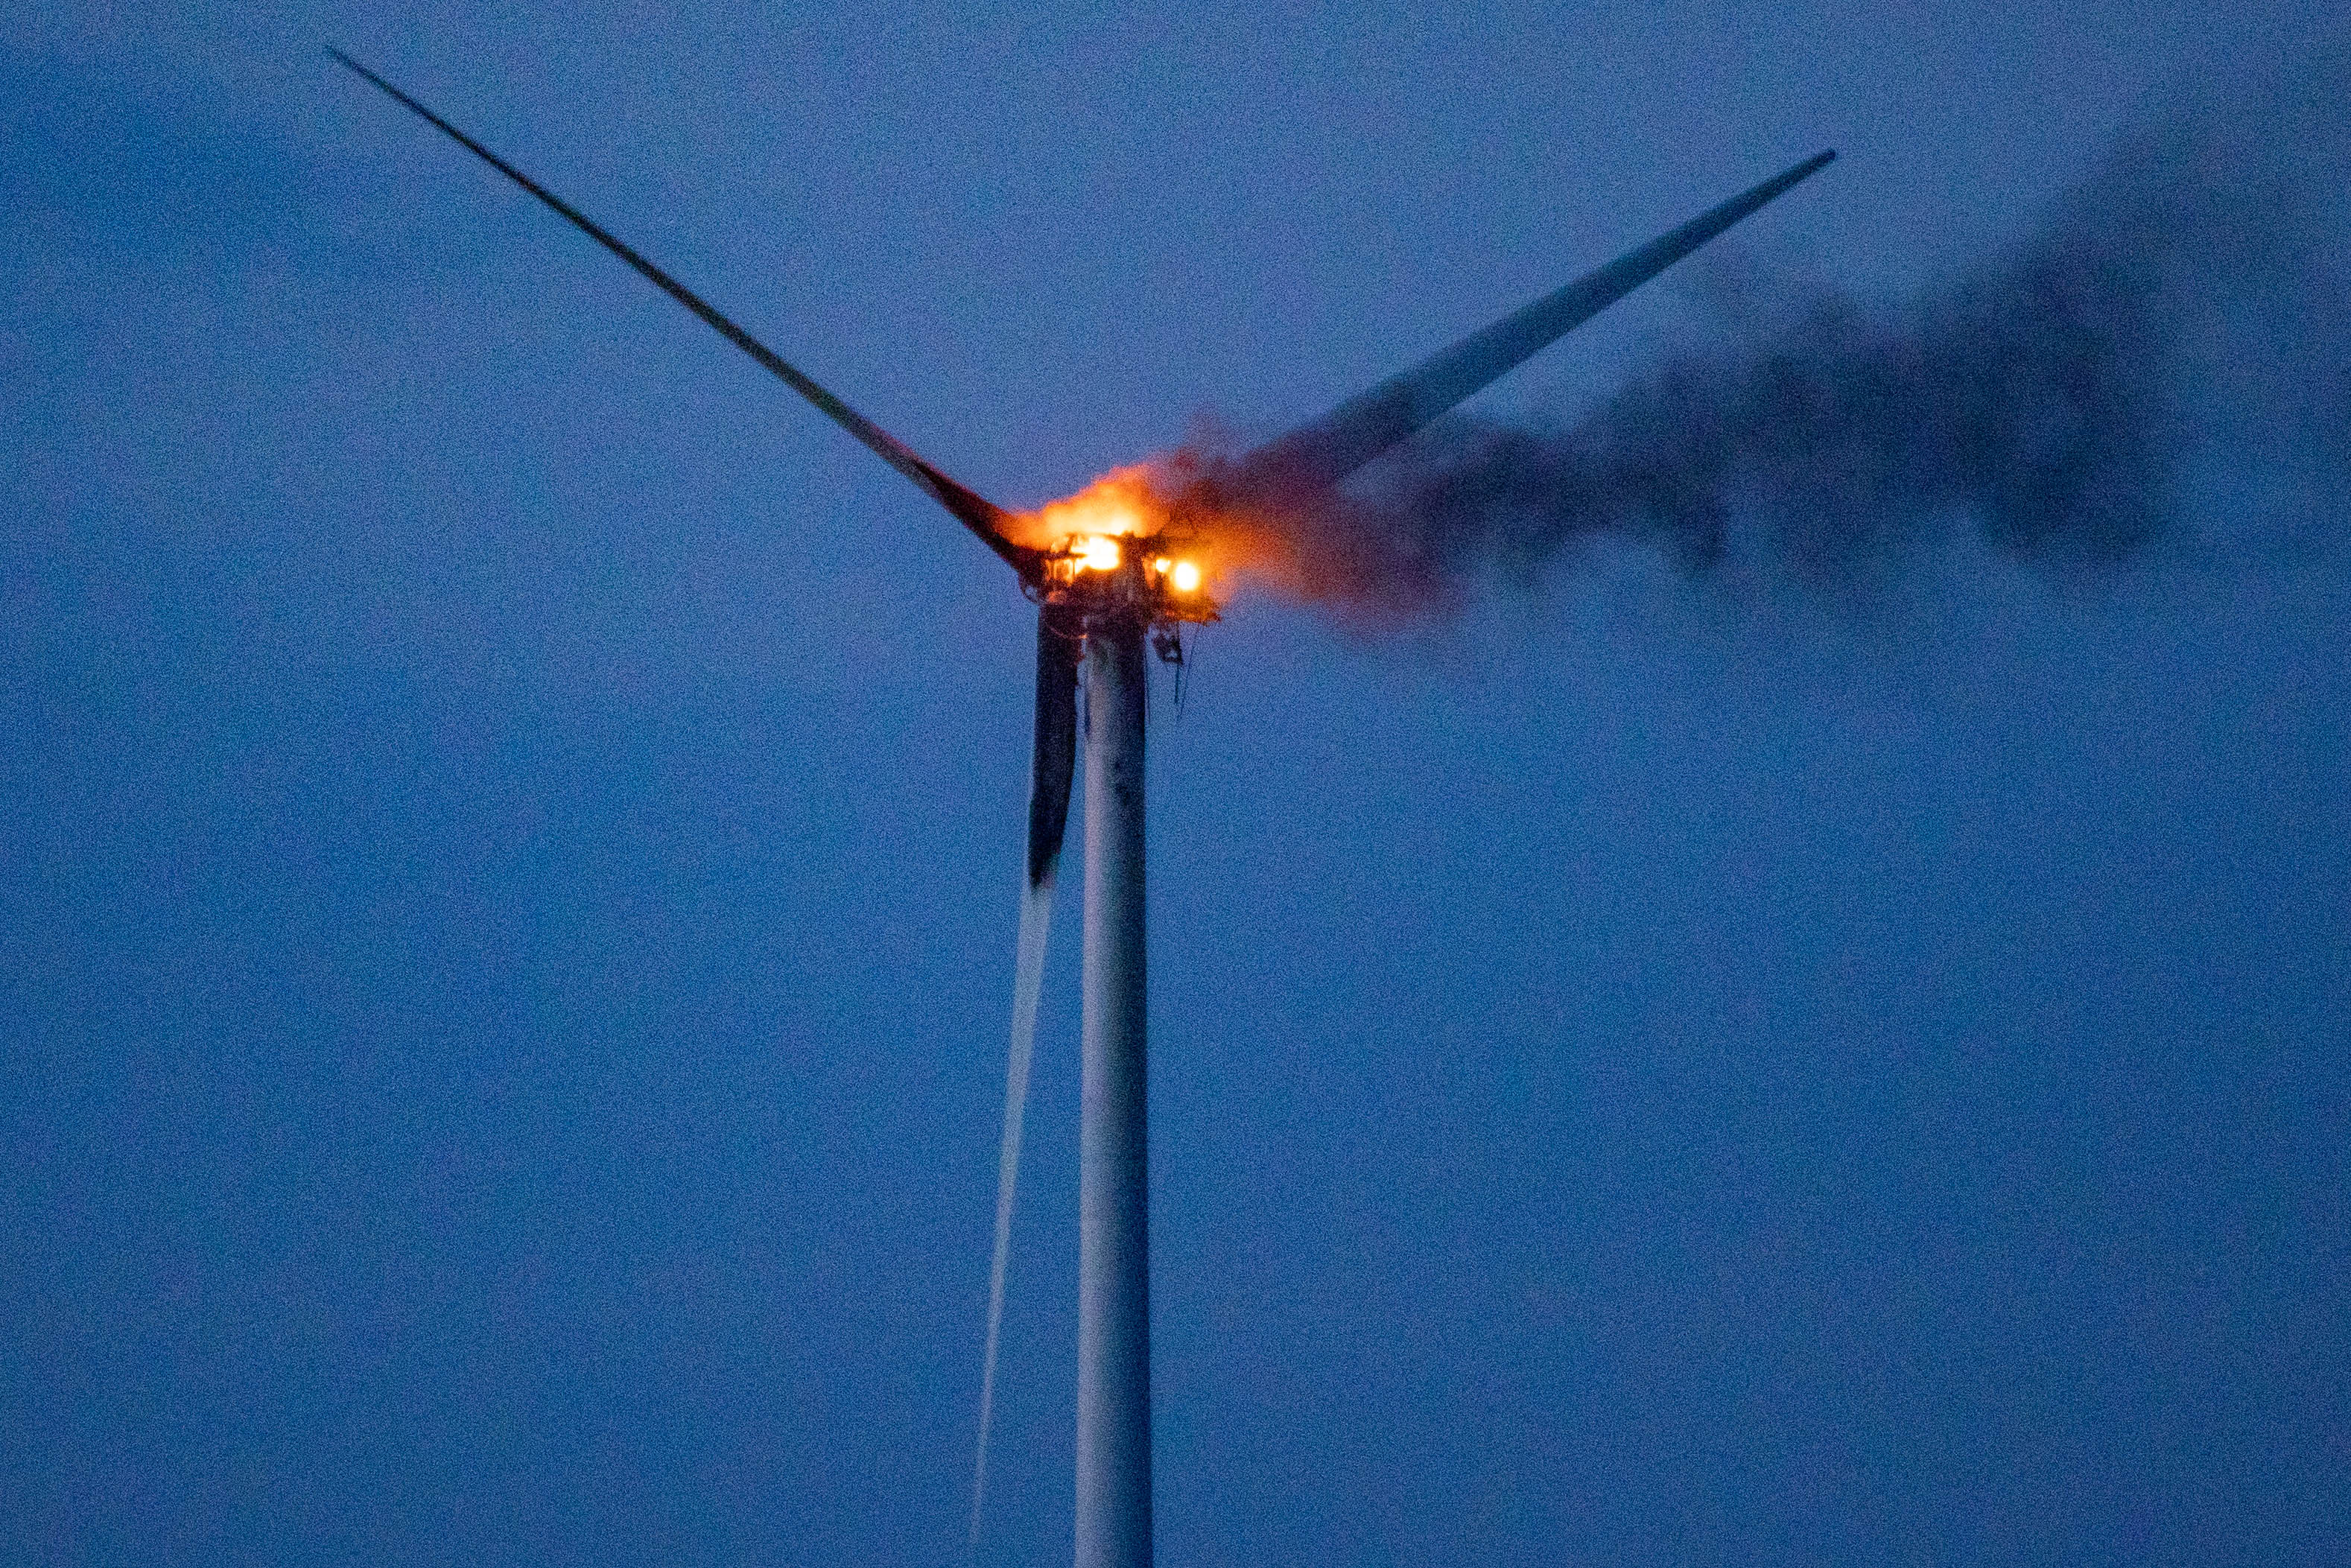 Dramatic pictures show wind turbine on fire in Cambridgeshire